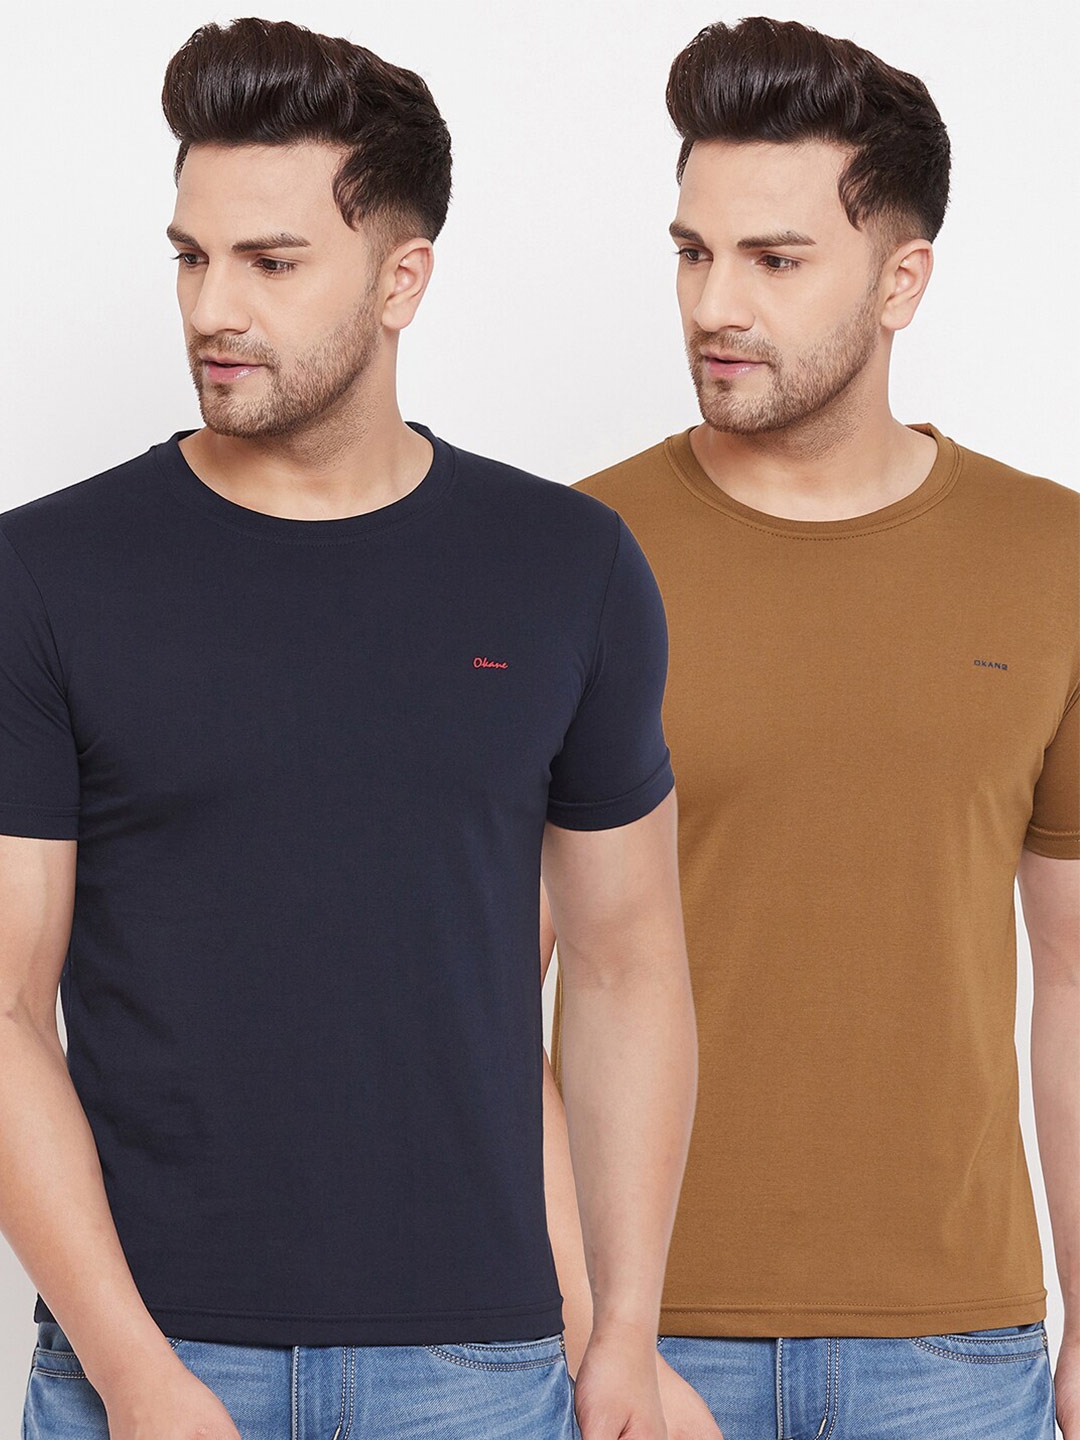 Okane Men Pack Of 2 Solid Round Neck T shirts